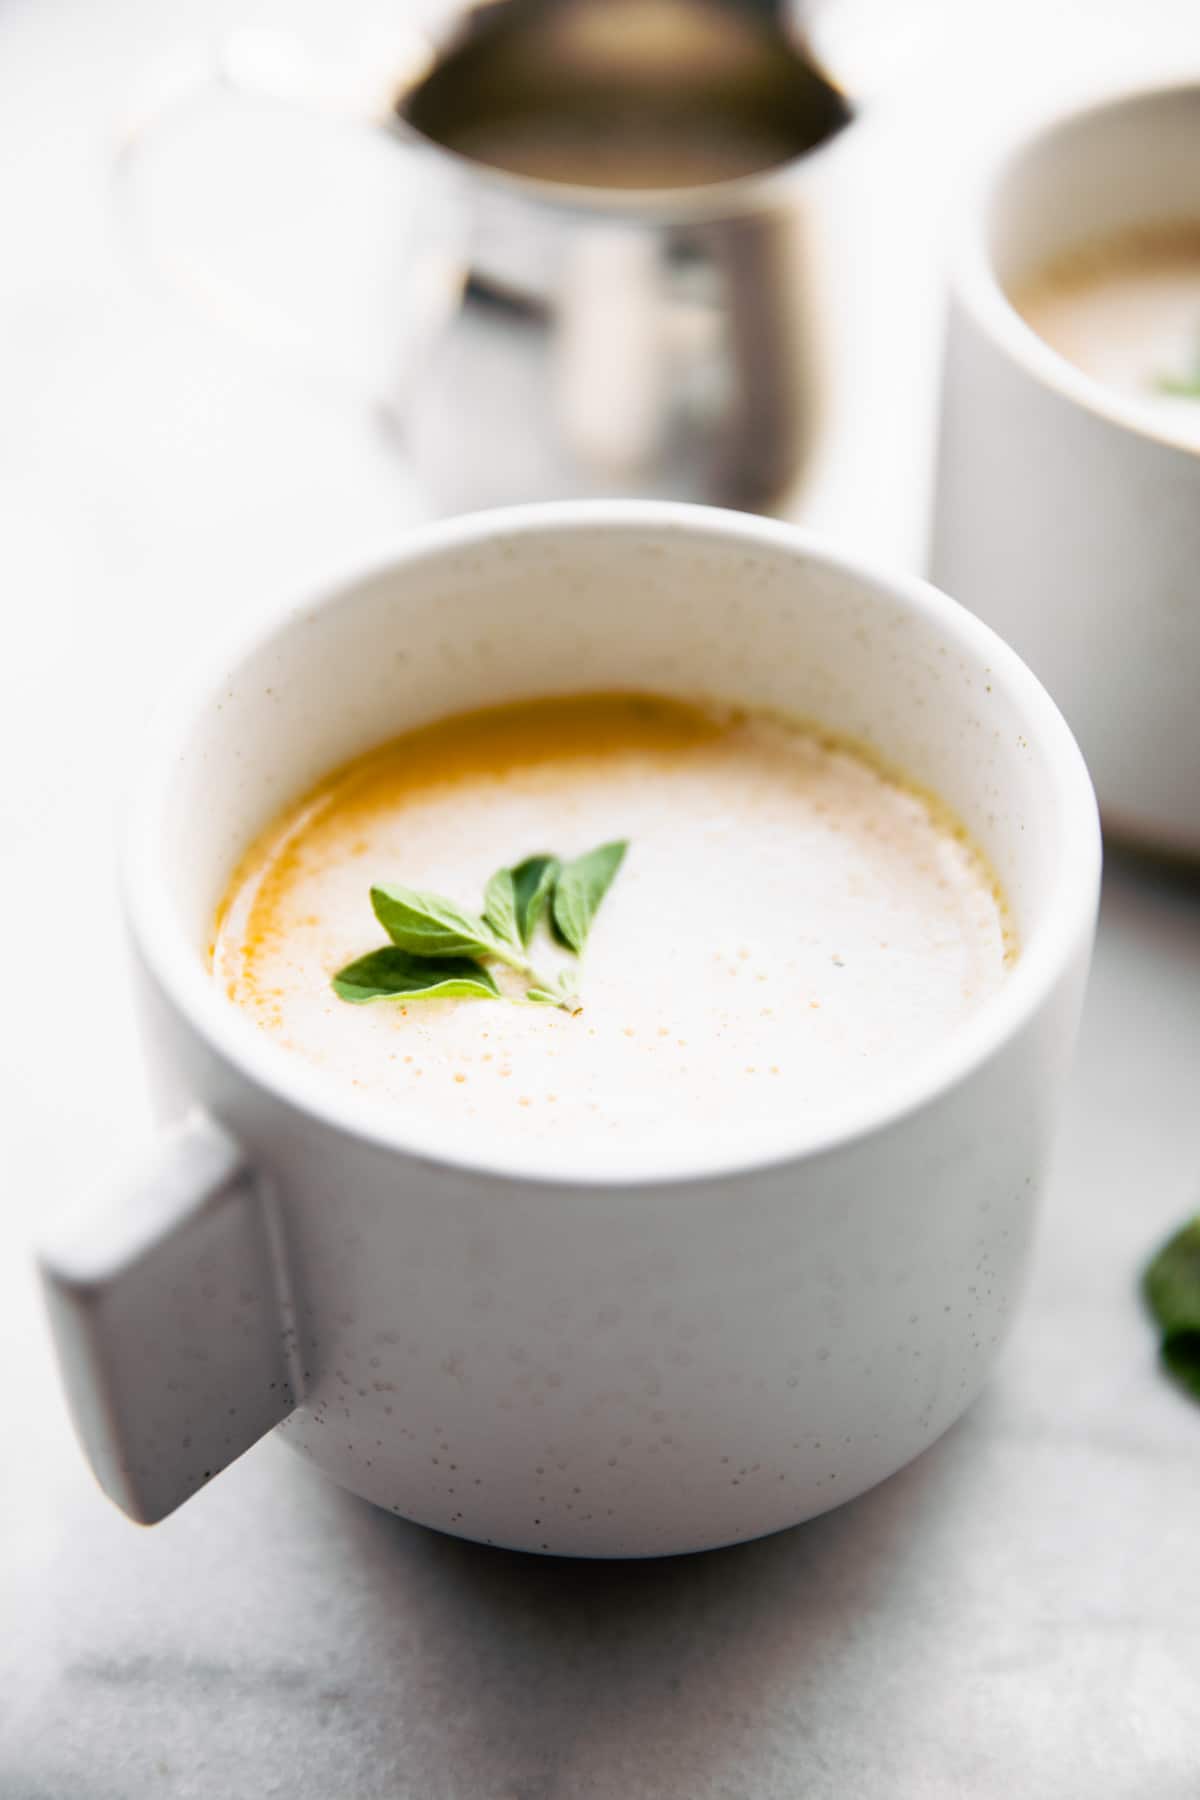 Bone broth latte in a white mug topped with a sprig of green herbs.